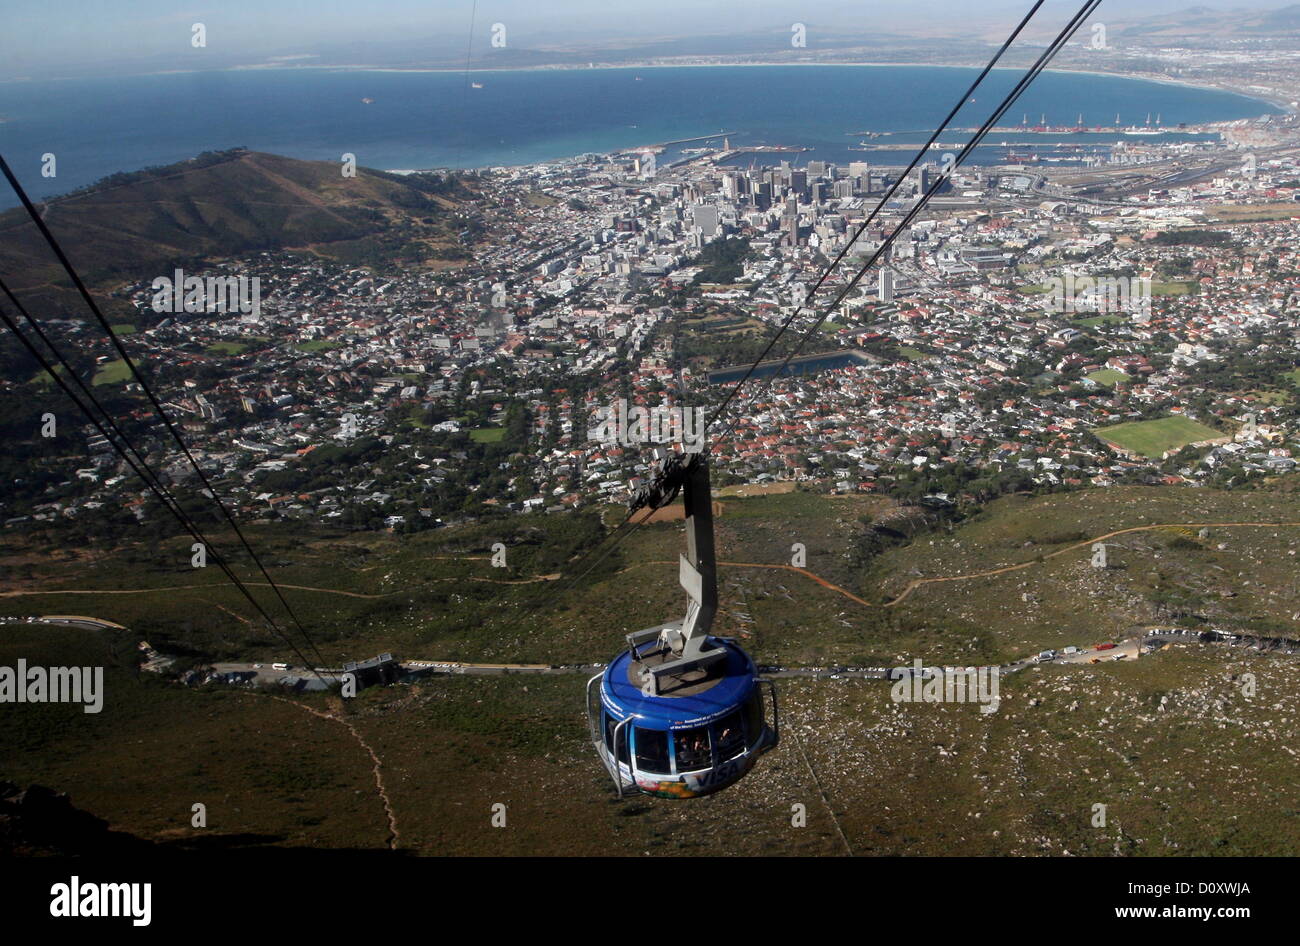 CAPE TOWN, SOUTH AFRICA: A view from the top of Table Mountain on November 29, 2012, in Cape Town, South Africa. Table Mountain is officially one of the New 7 Wonders of Nature. (Photo by Gallo Images / Sunday Times / Esa Alexander) Stock Photo